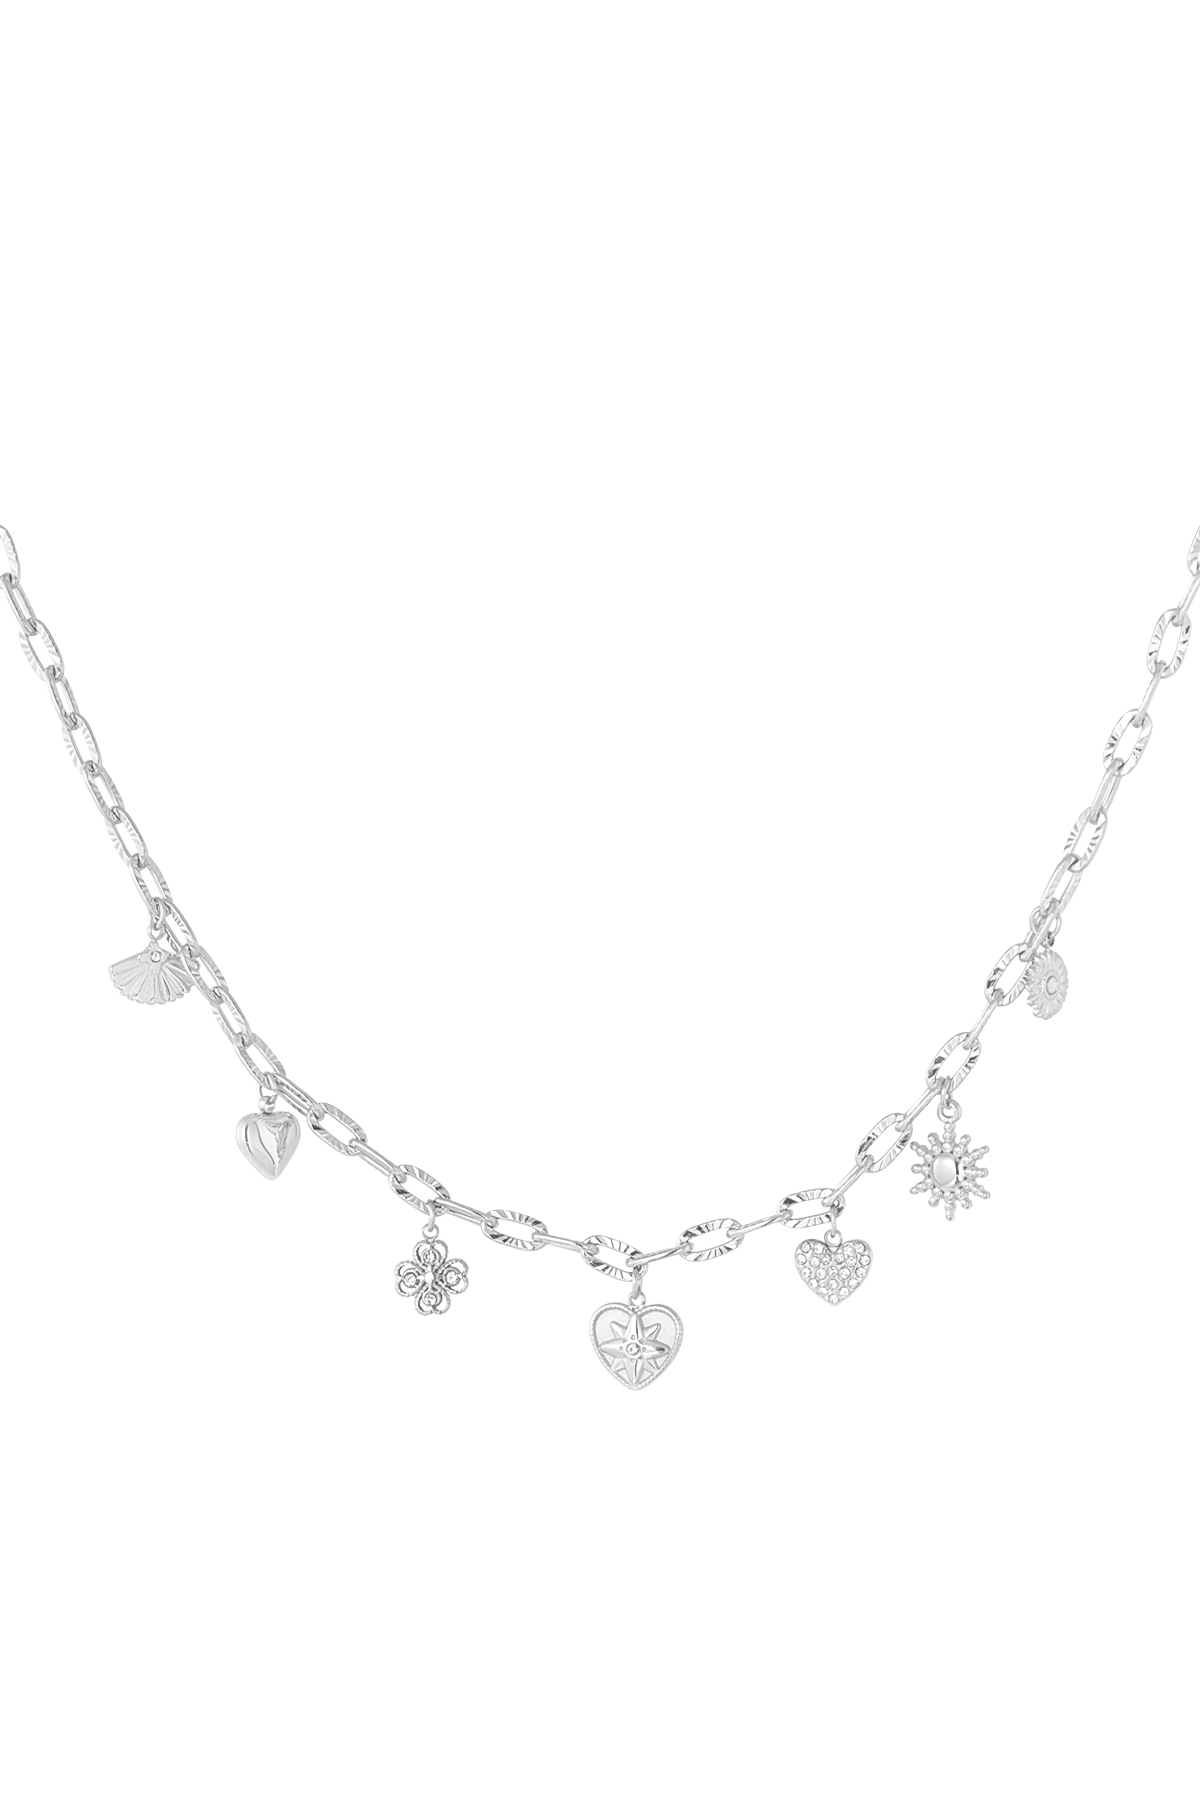 Charm necklace daily style - silver 